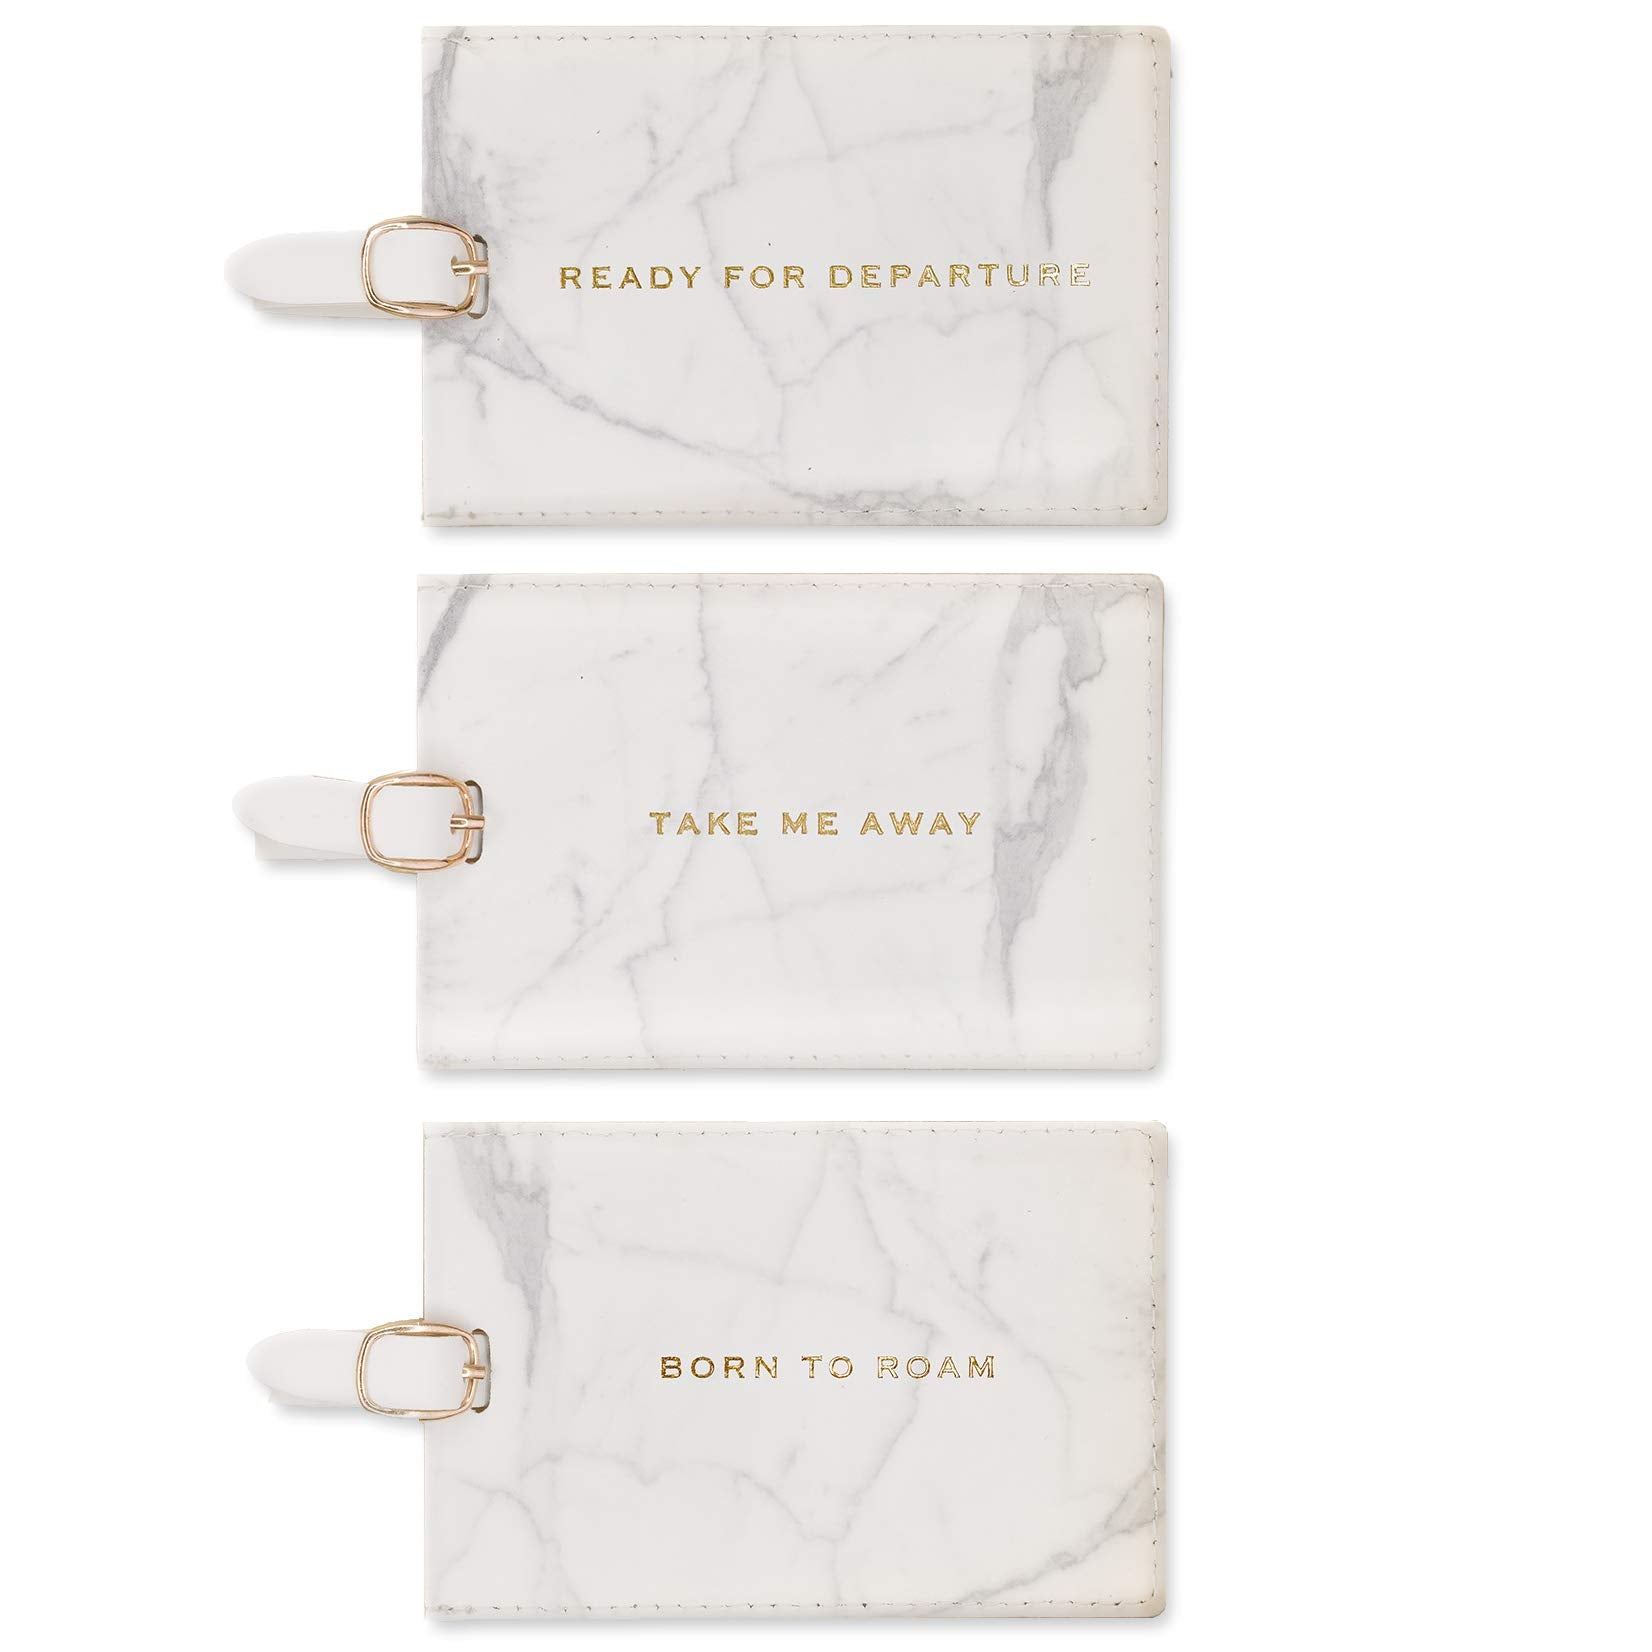 Eccolo 3 Pack Luggage Tag Set Marble Design